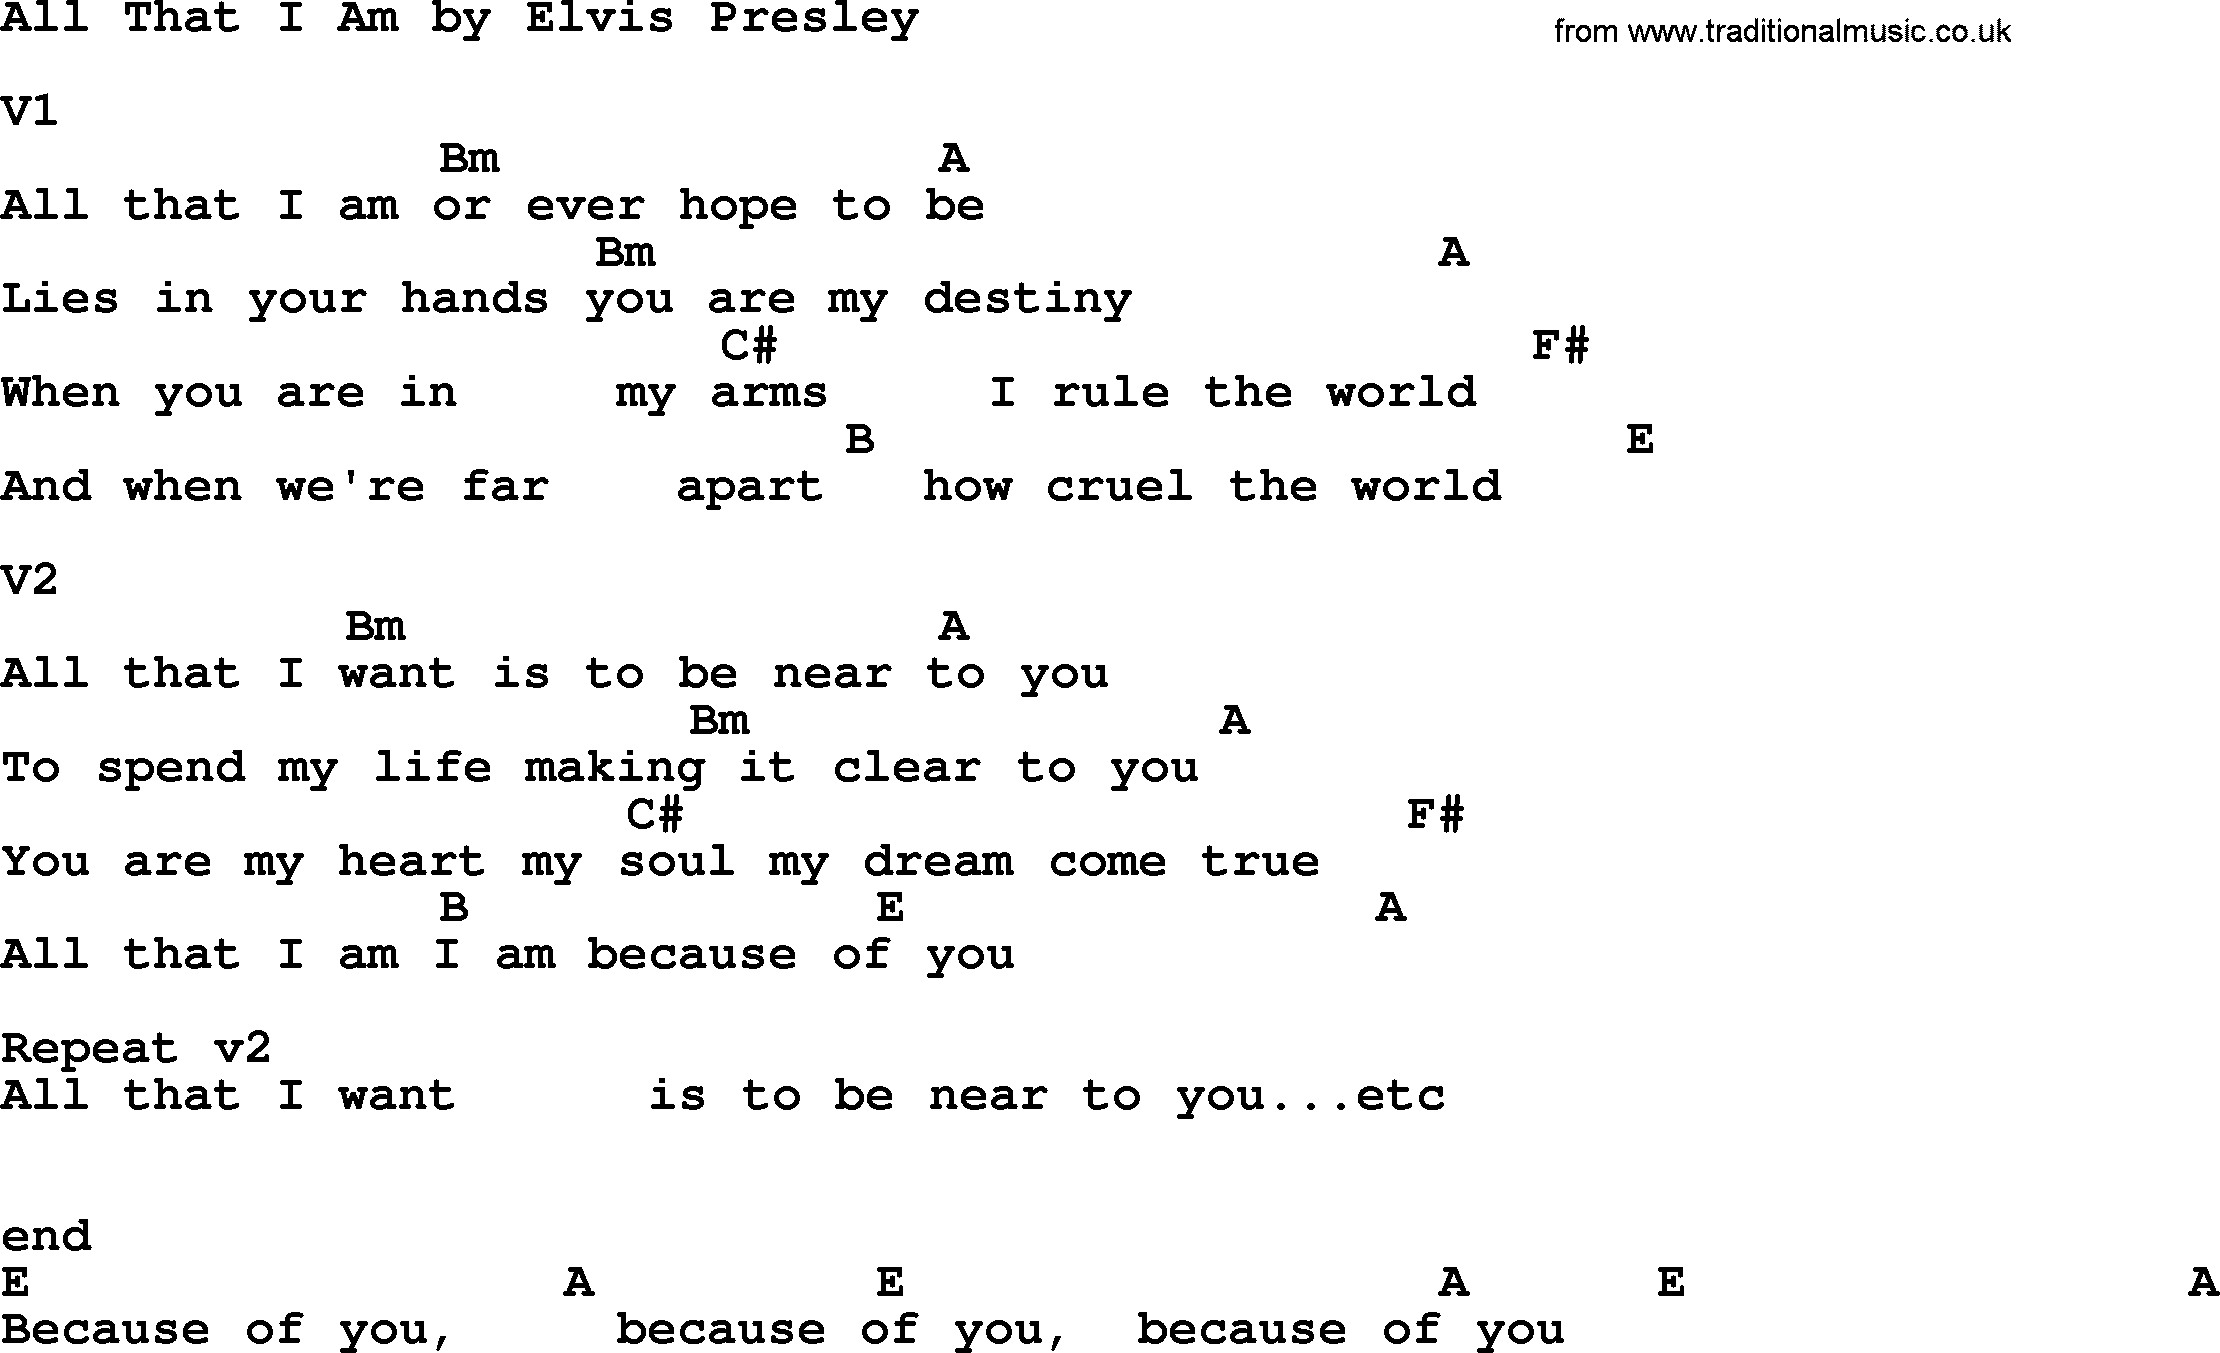 Elvis Presley song: All That I Am, lyrics and chords